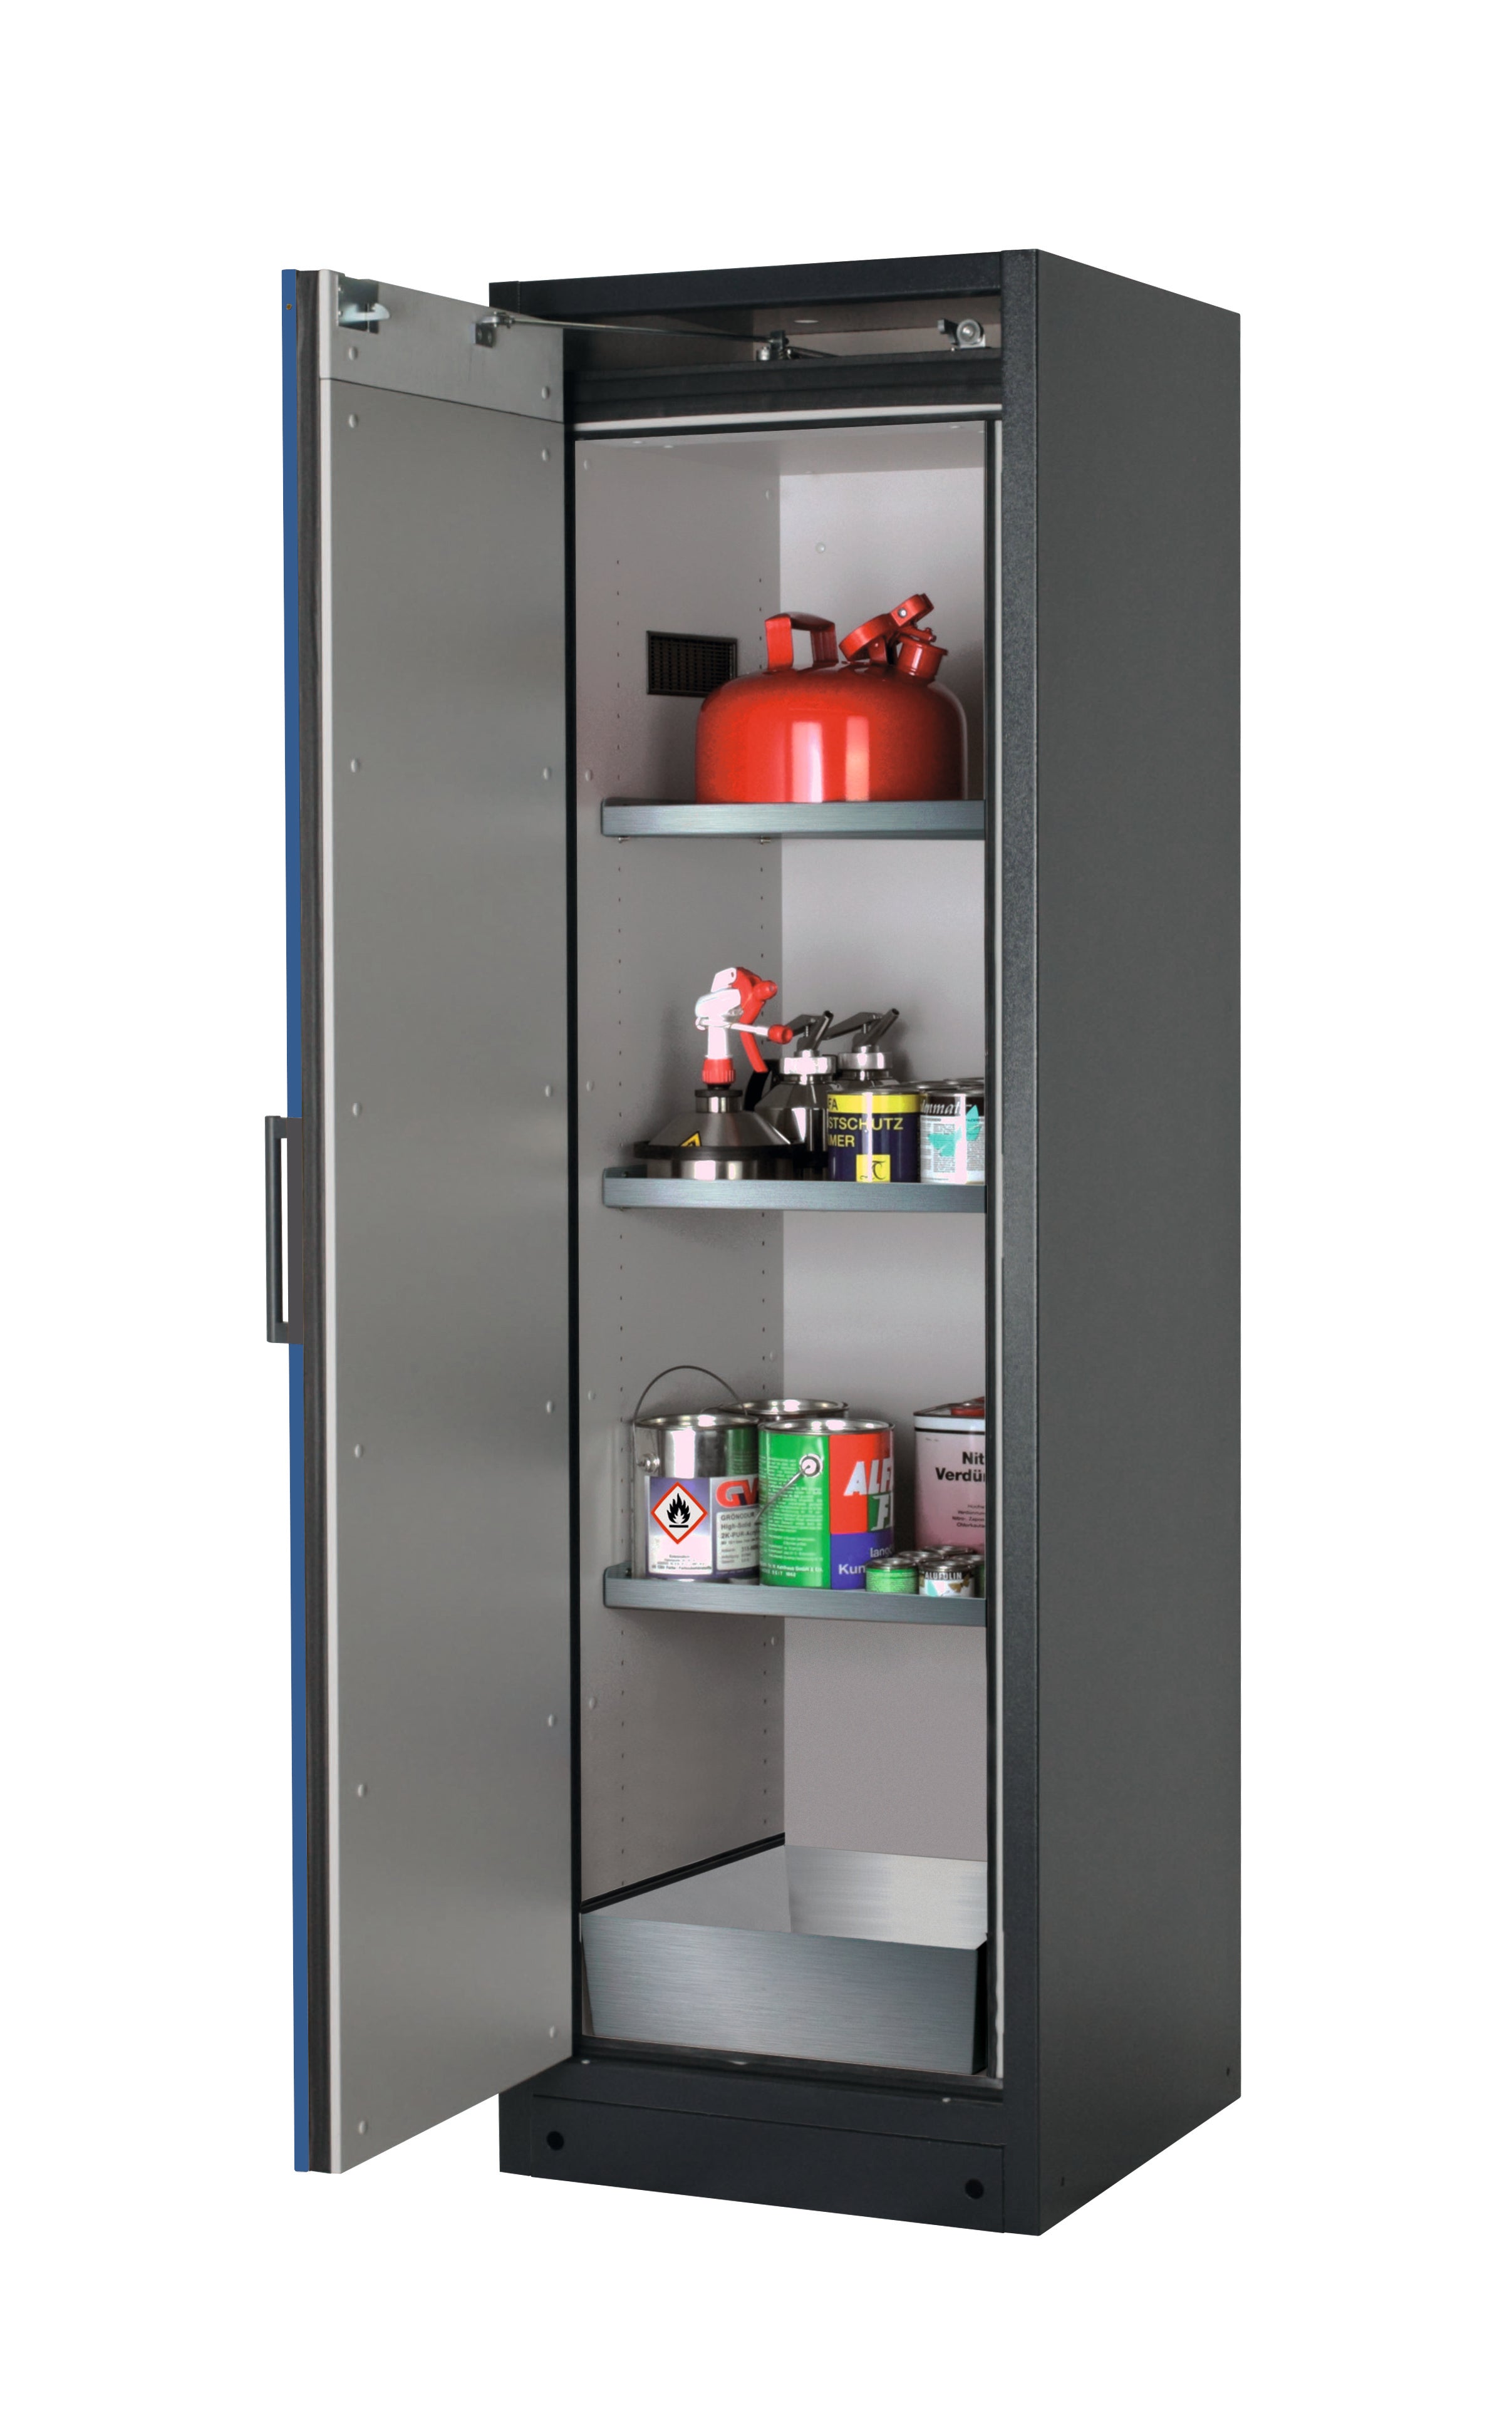 Type 90 safety storage cabinet Q-PEGASUS-90 model Q90.195.060.WDAC in gentian blue RAL 5010 with 3x shelf standard (stainless steel 1.4301),